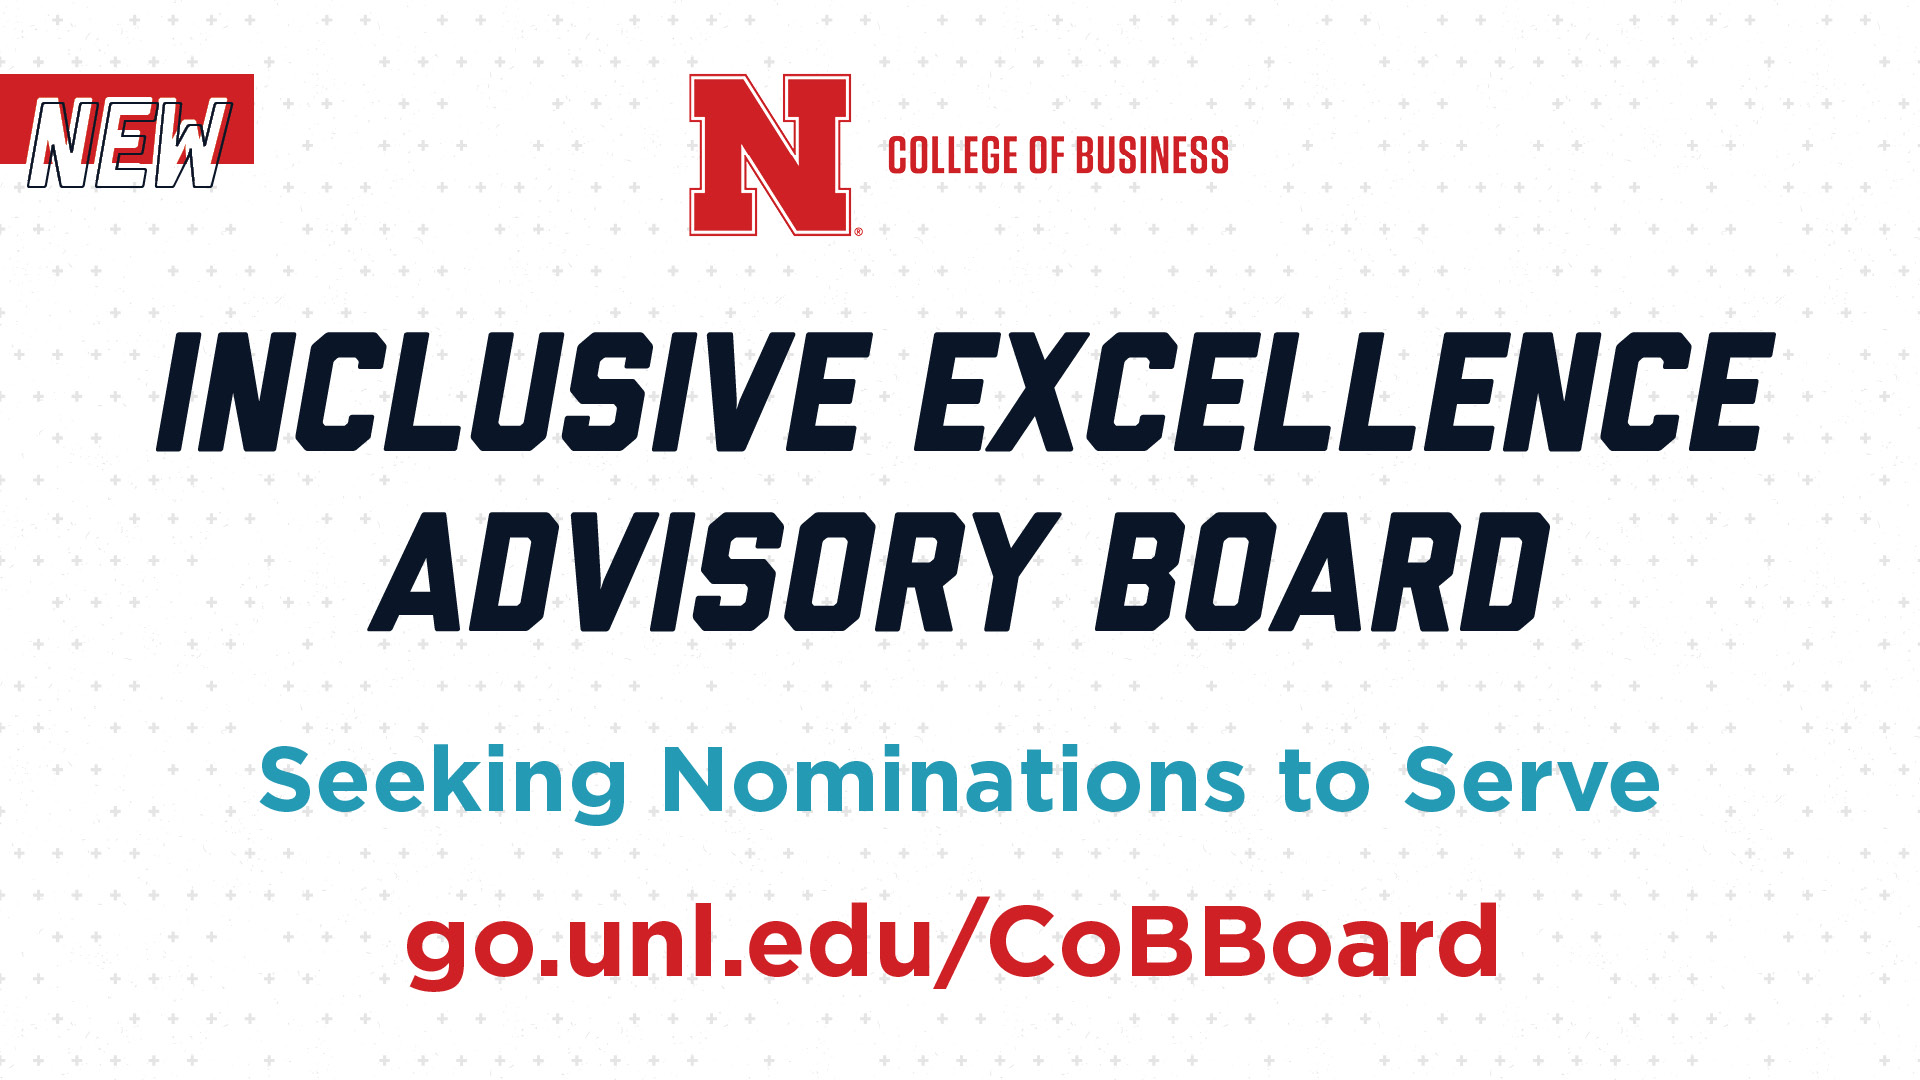 Call for Nominations: Inclusive Excellence Advisory Board